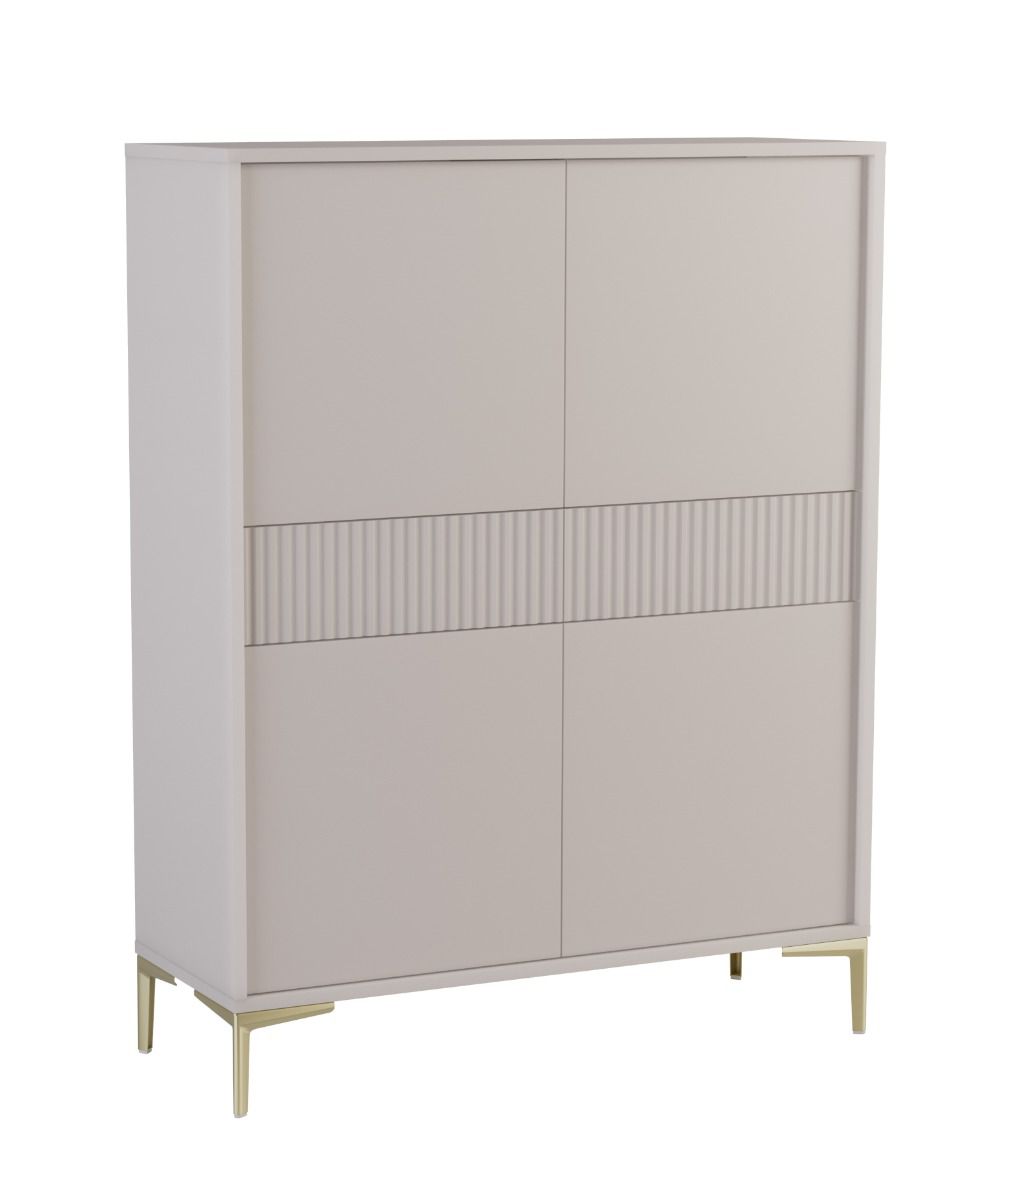 Modern chest of drawers Chabrey 06, color: beige, 133 x 103 x 38, feet made of metal in the color gold, 2 drawers with ribbed front, 8 compartments, 4 doors